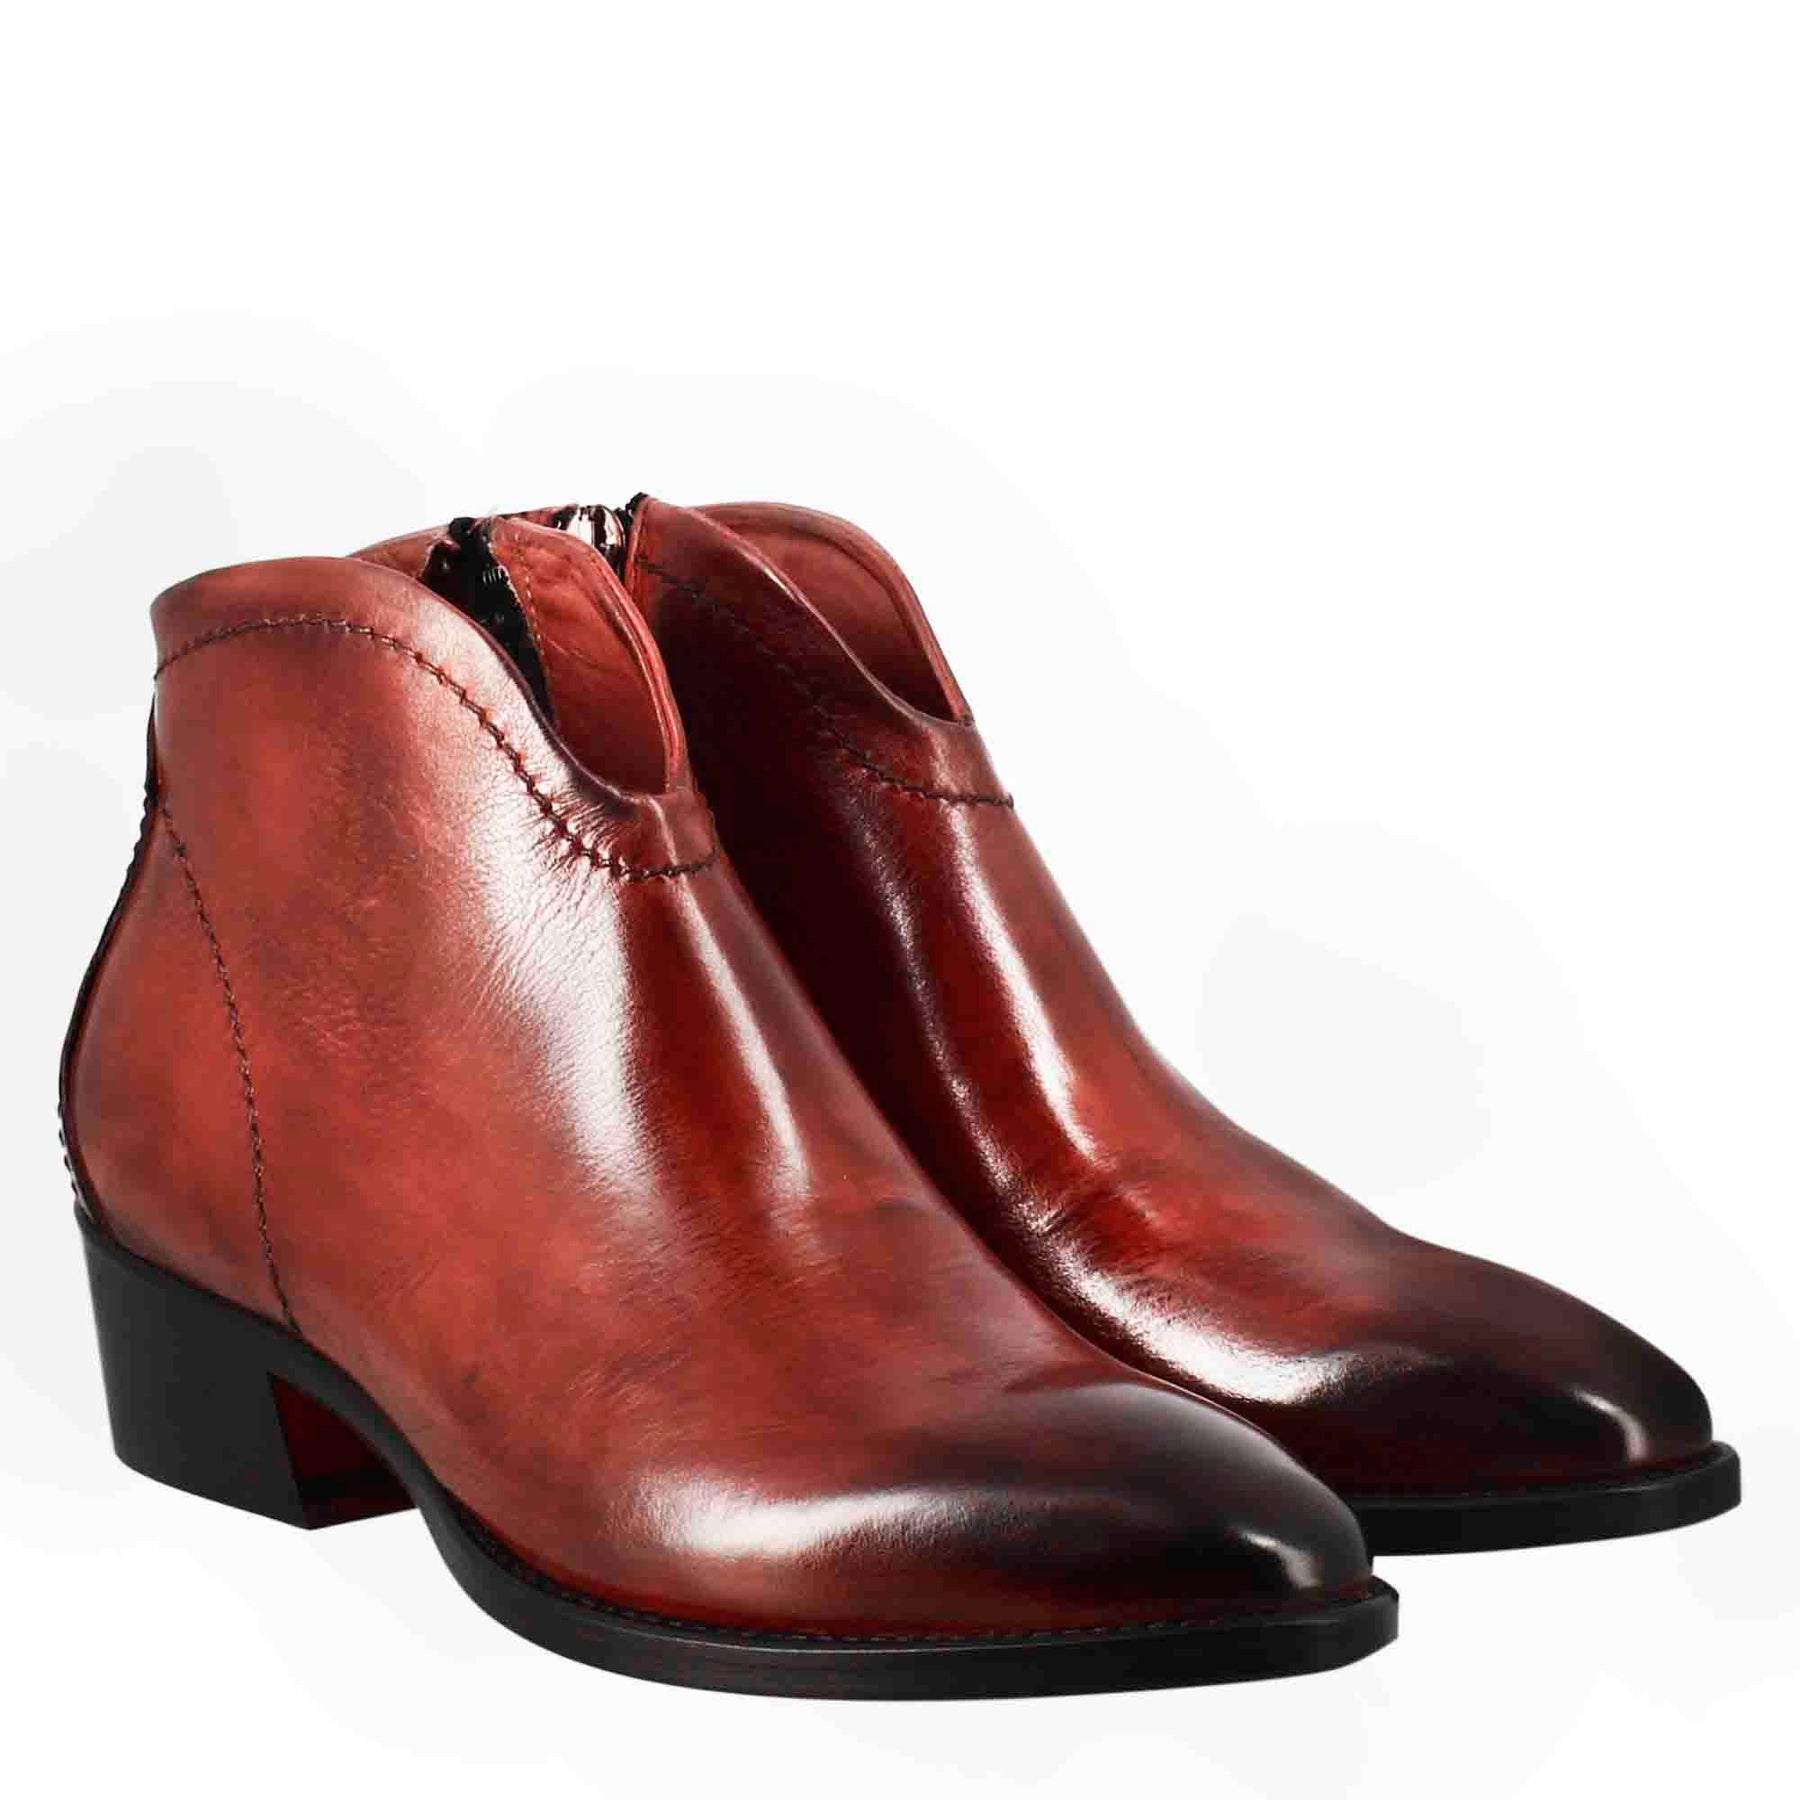 Smooth women's ankle boot with medium heel in red leather